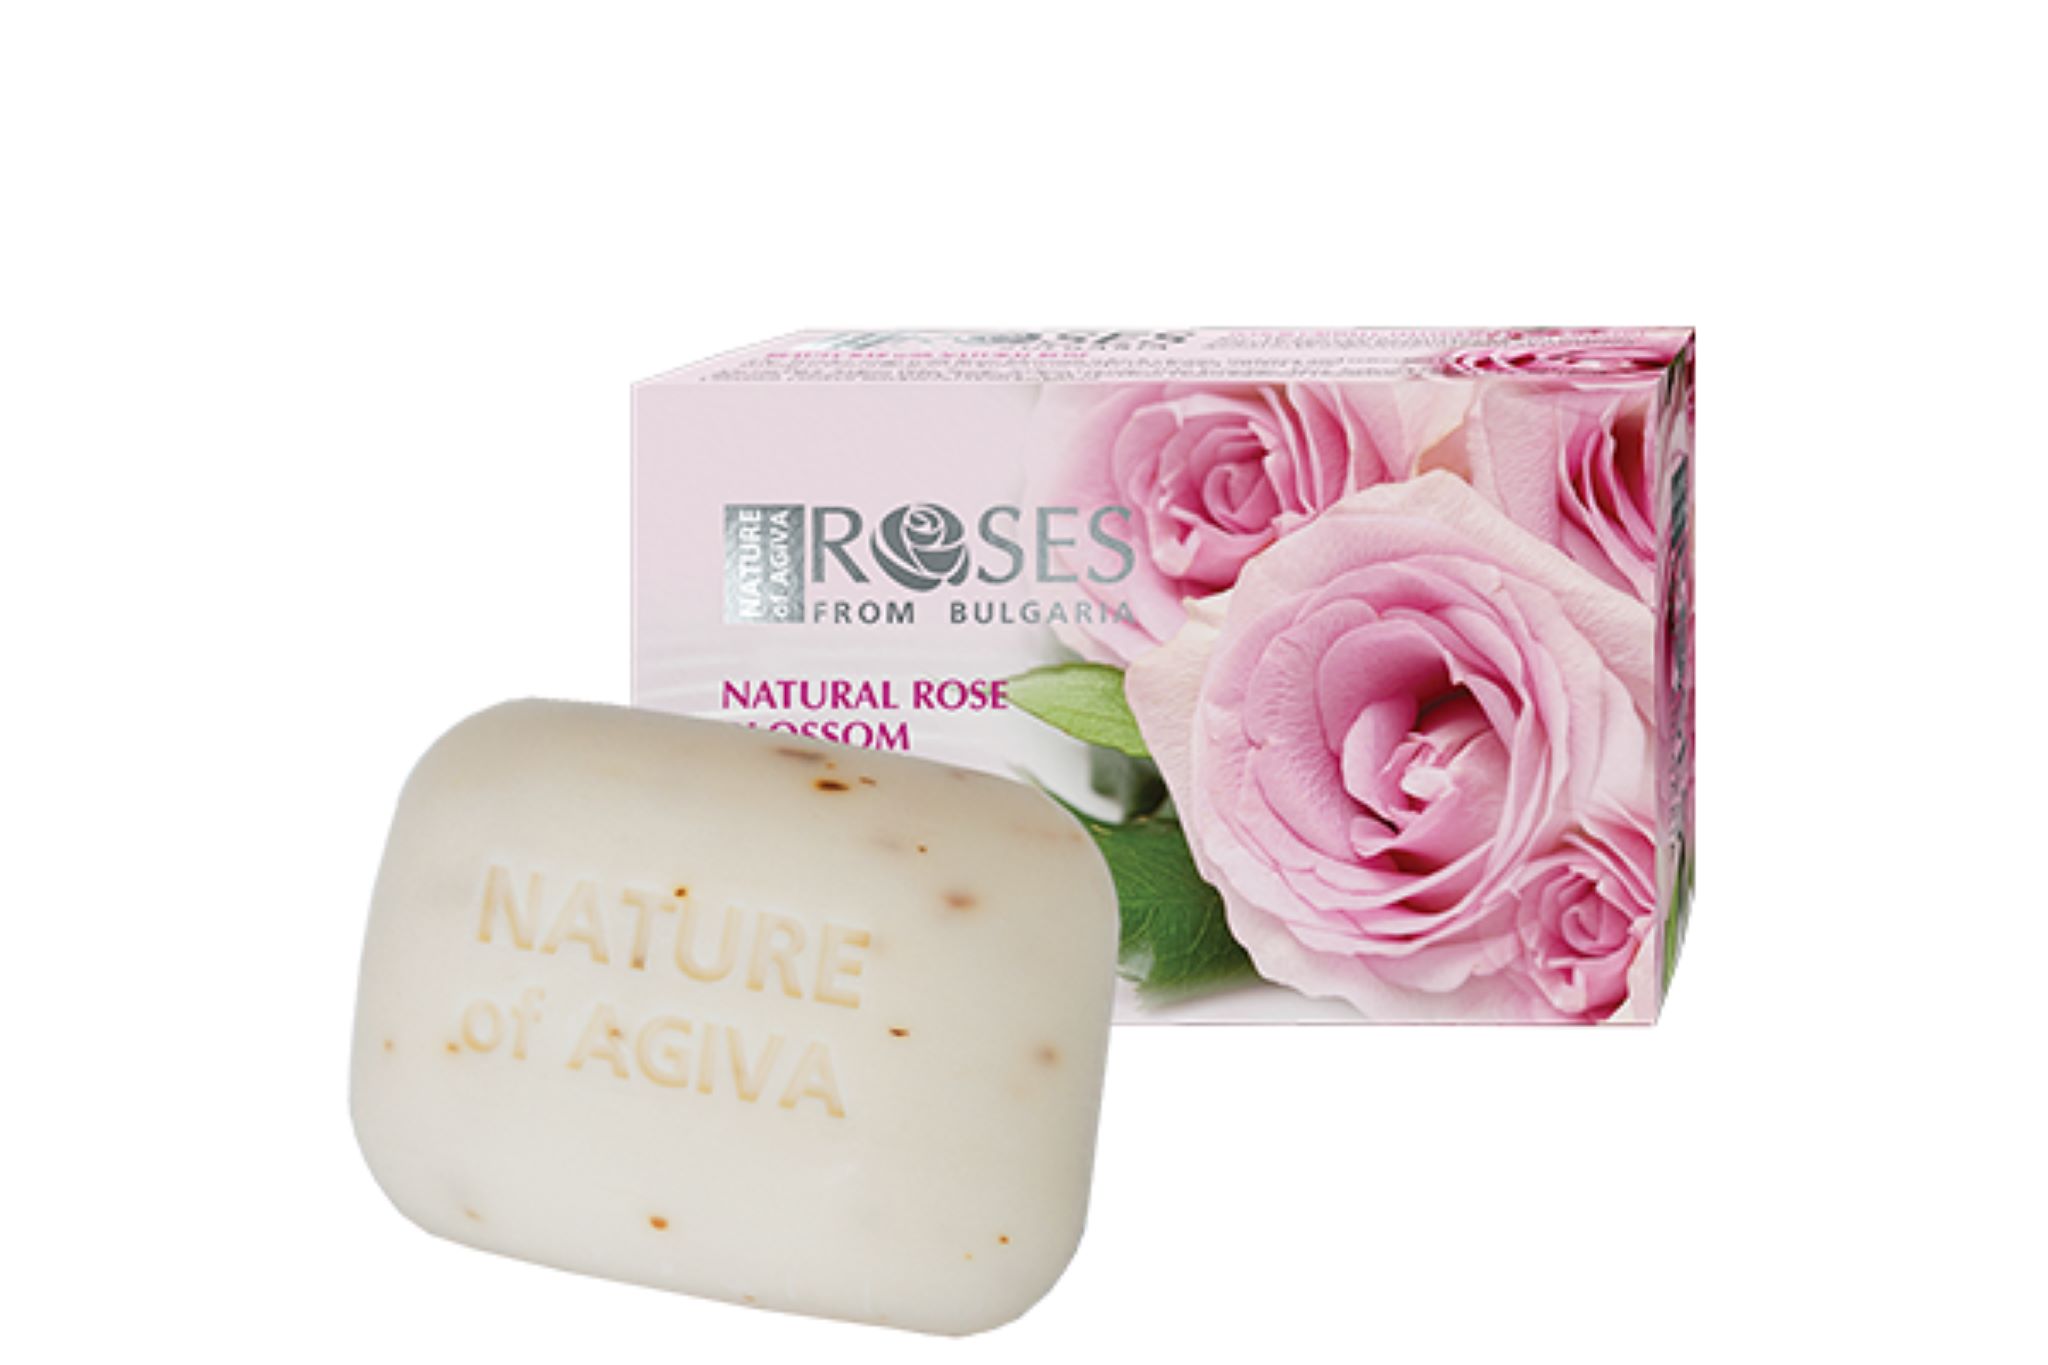 Nature of Agiva Roses szappan 75g 92176